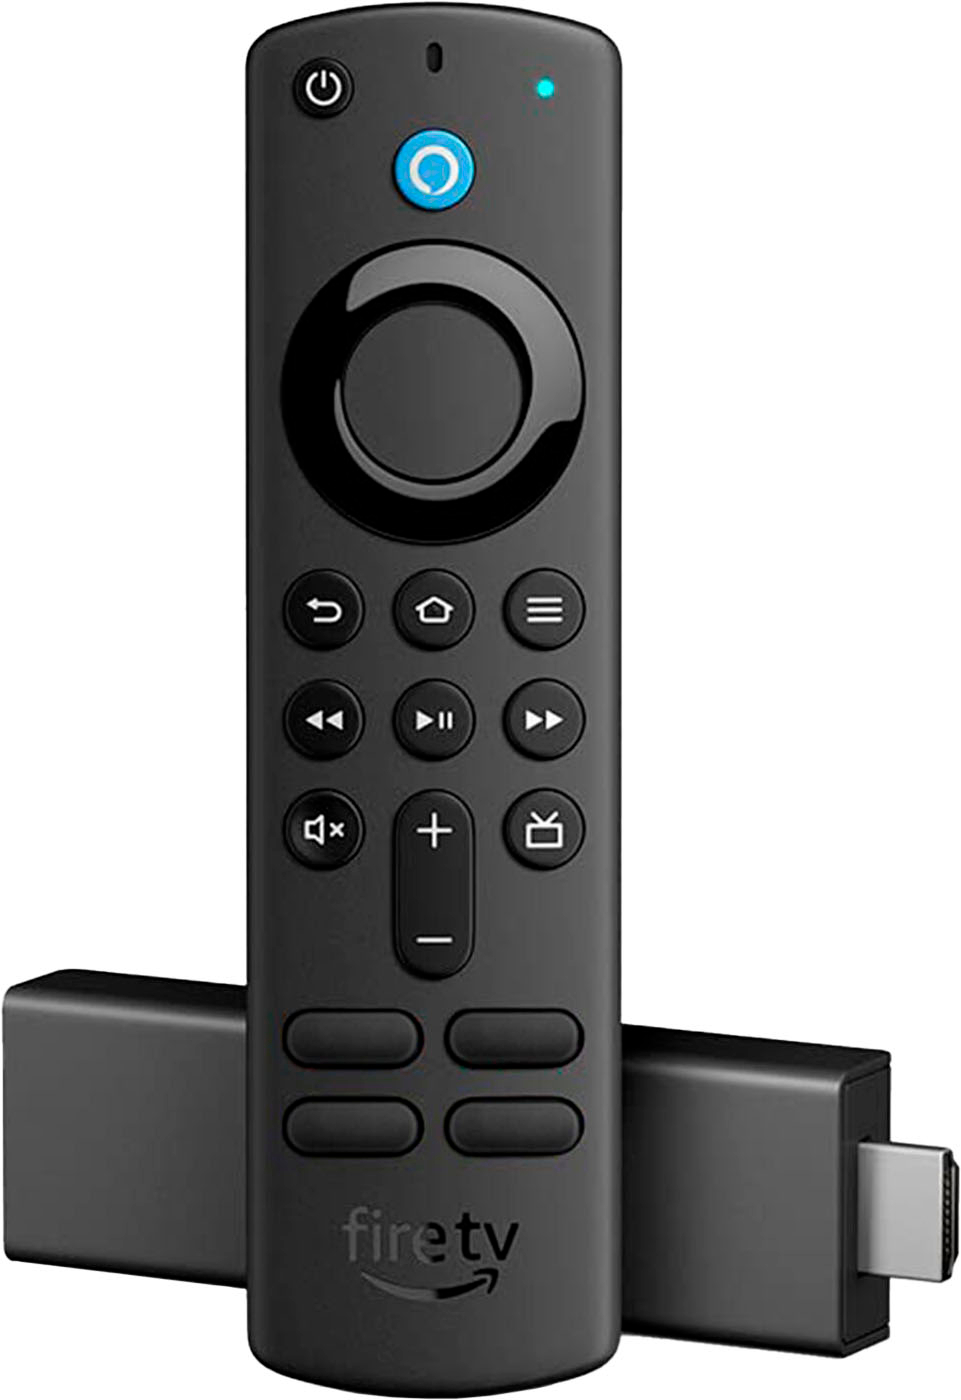 Amazon Fire TV Stick 4K with Alexa Voice Remote, Dolby Vision, HD Streaming  Media Player (includes TV controls) Black B08XVYZ1Y5 - Best Buy